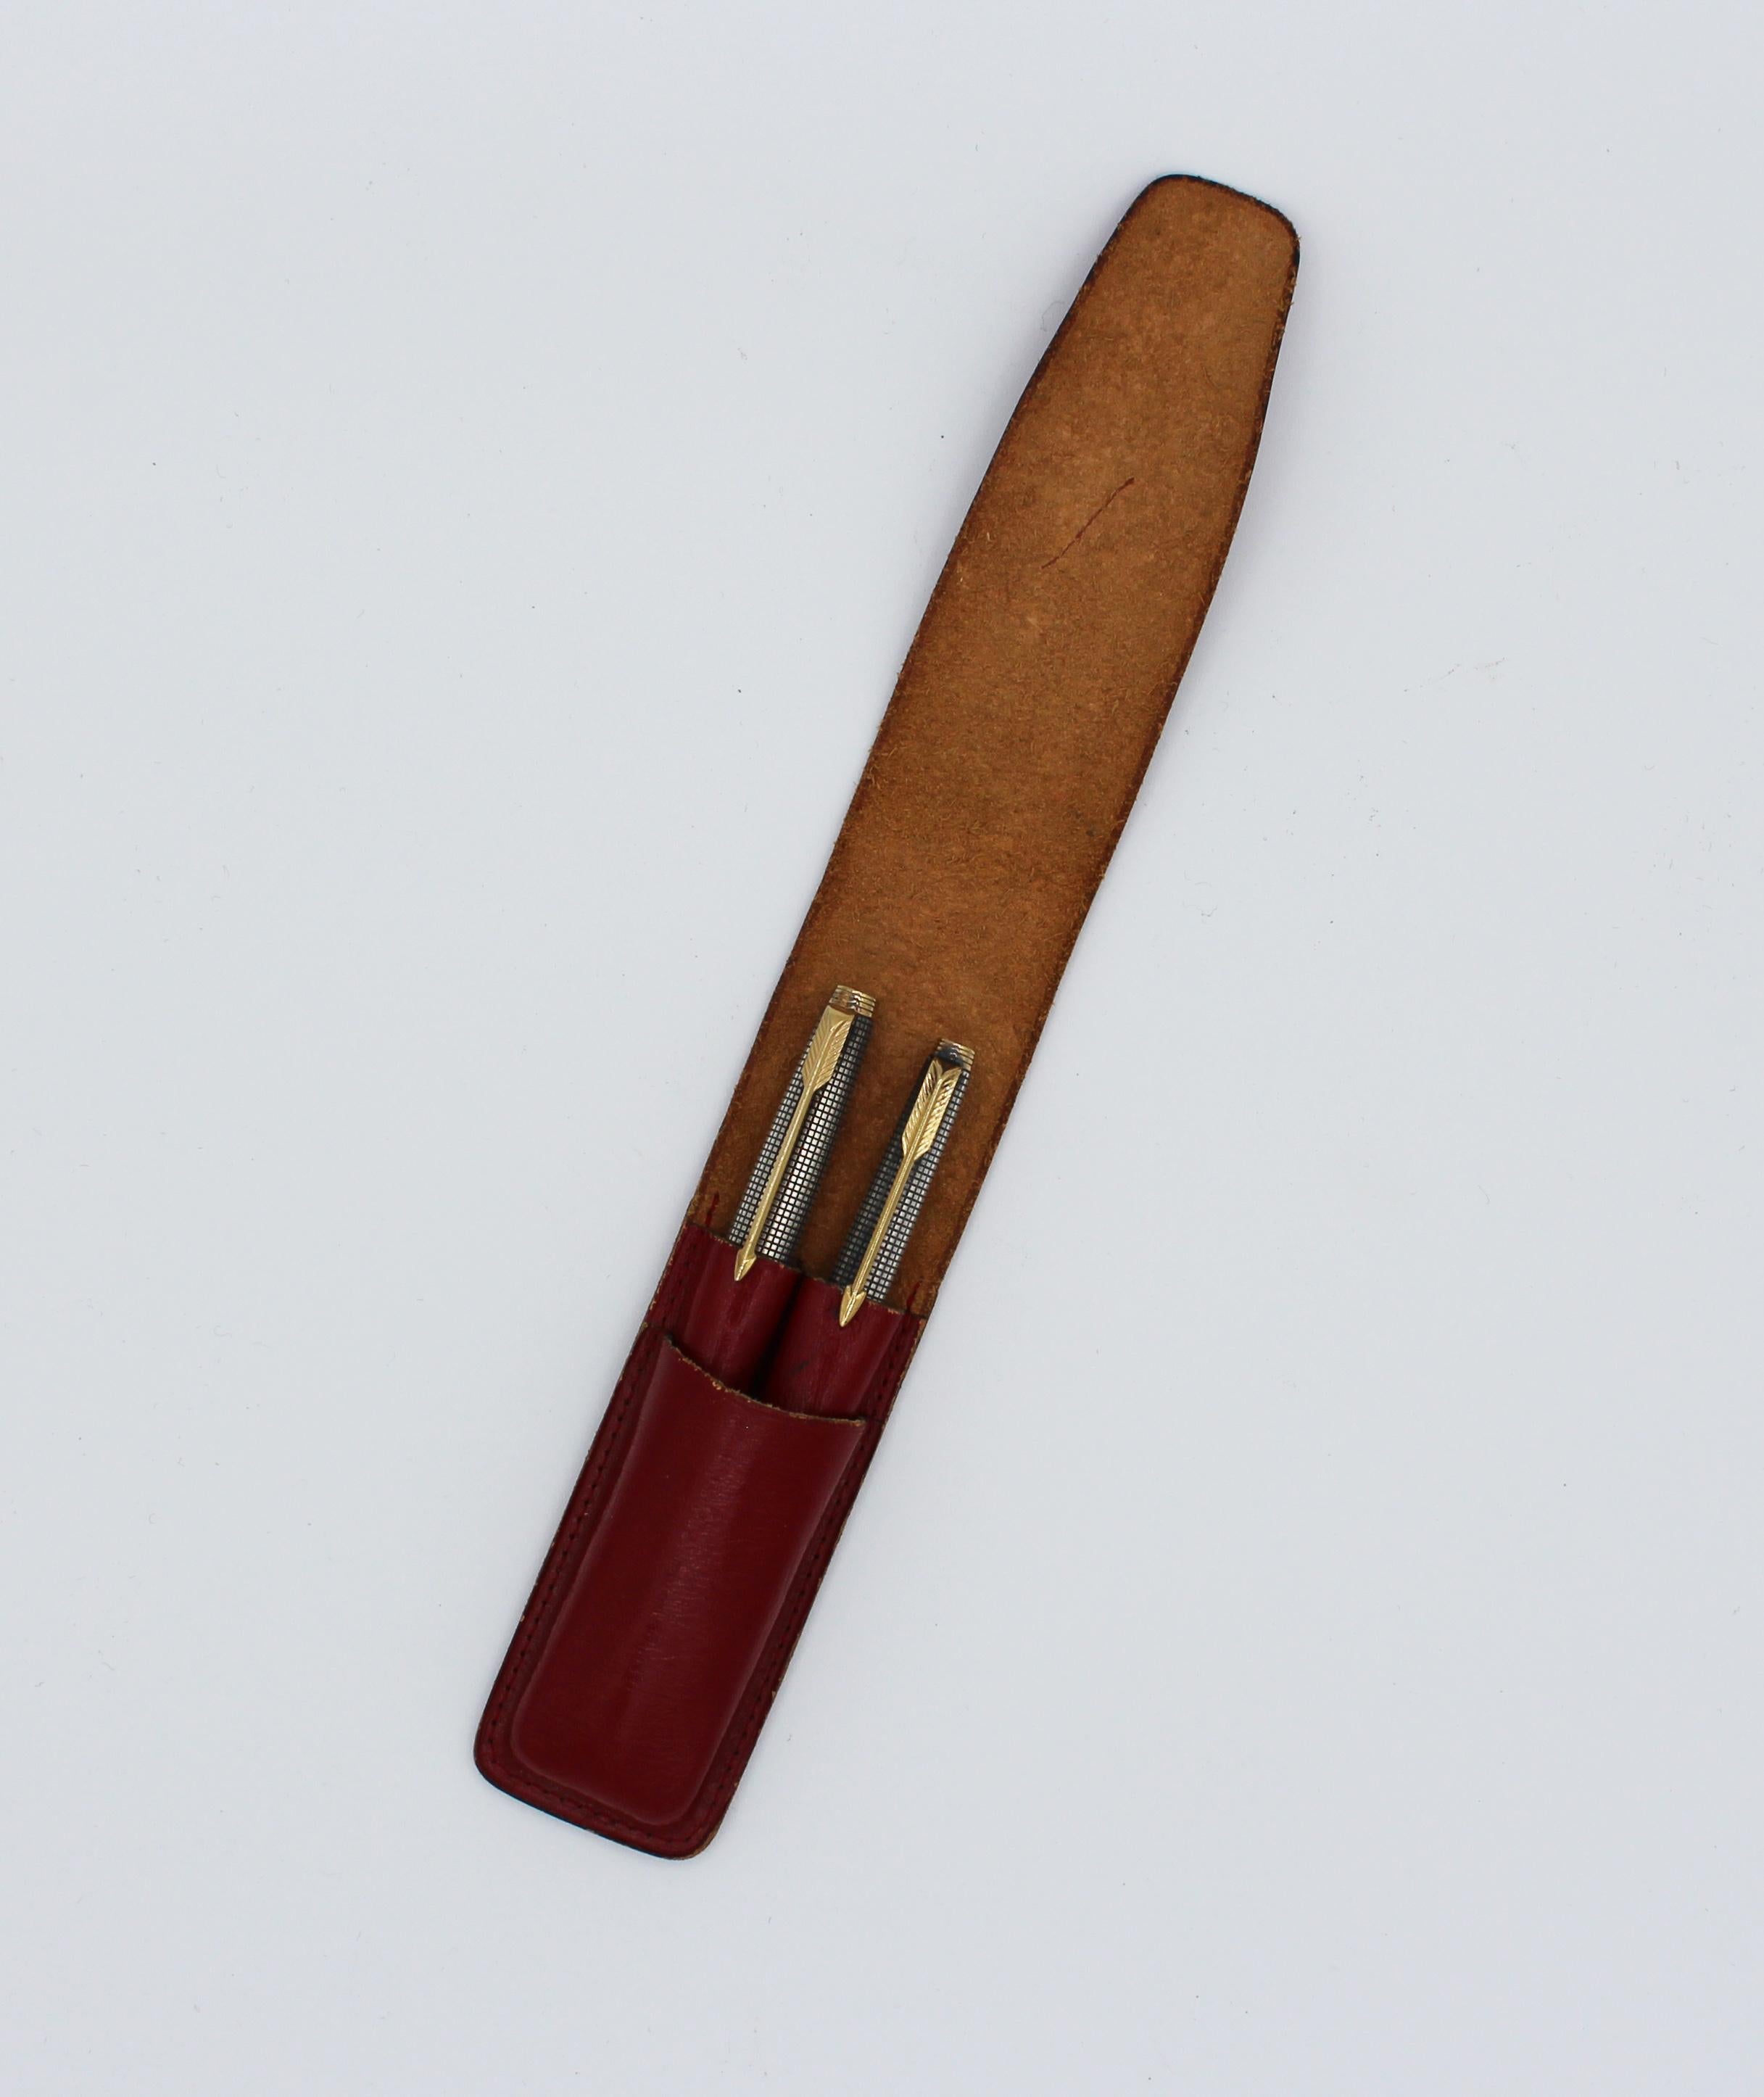 A Vintage Parker 75 Cisele sterling and gilt fountain pen and pencil set in associated red leather case; 14k gold XF nib marked Parker, 14k Point, USA. Pencil also marked sterling silver, Parker, Made in USA. Pencil insert lacking. Sold from estate